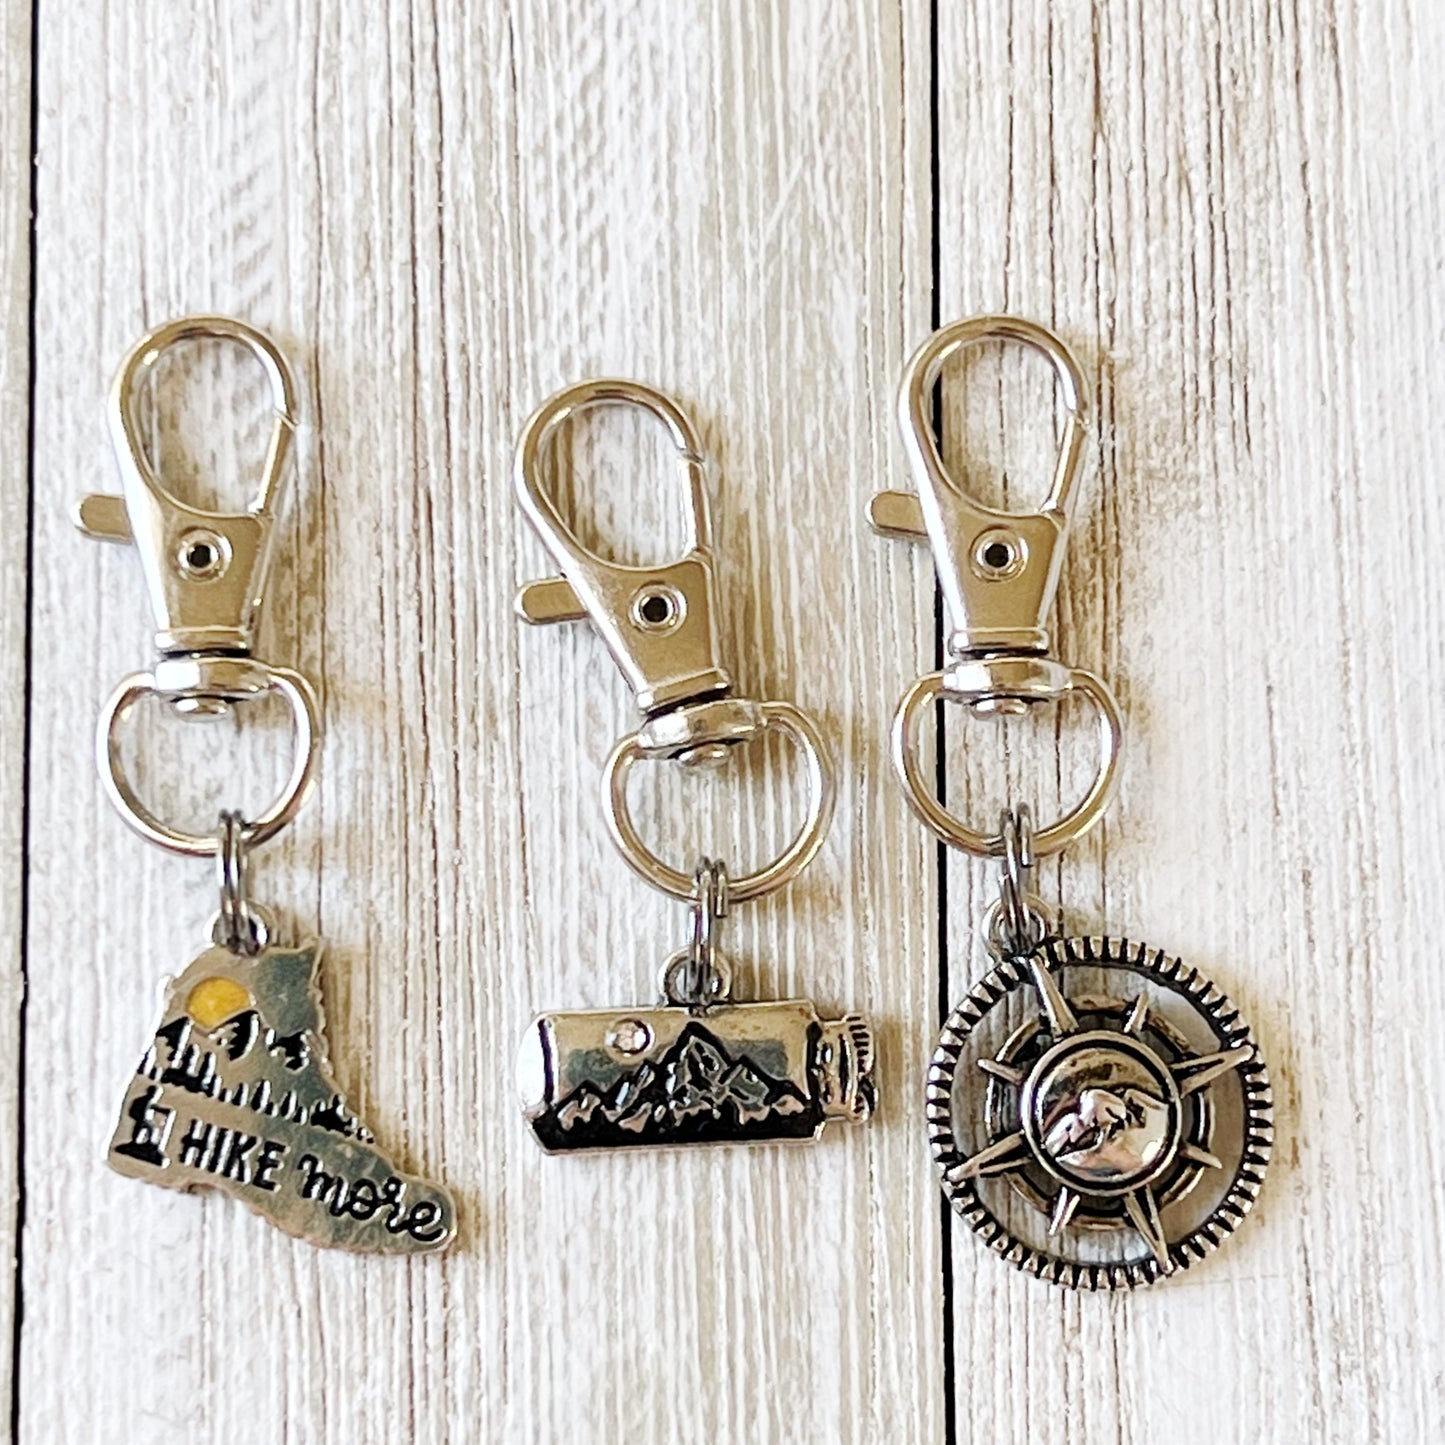 Hike More Mountains Zipper Pull Keychain Charm: Adventure-Inspired Purse Accessories